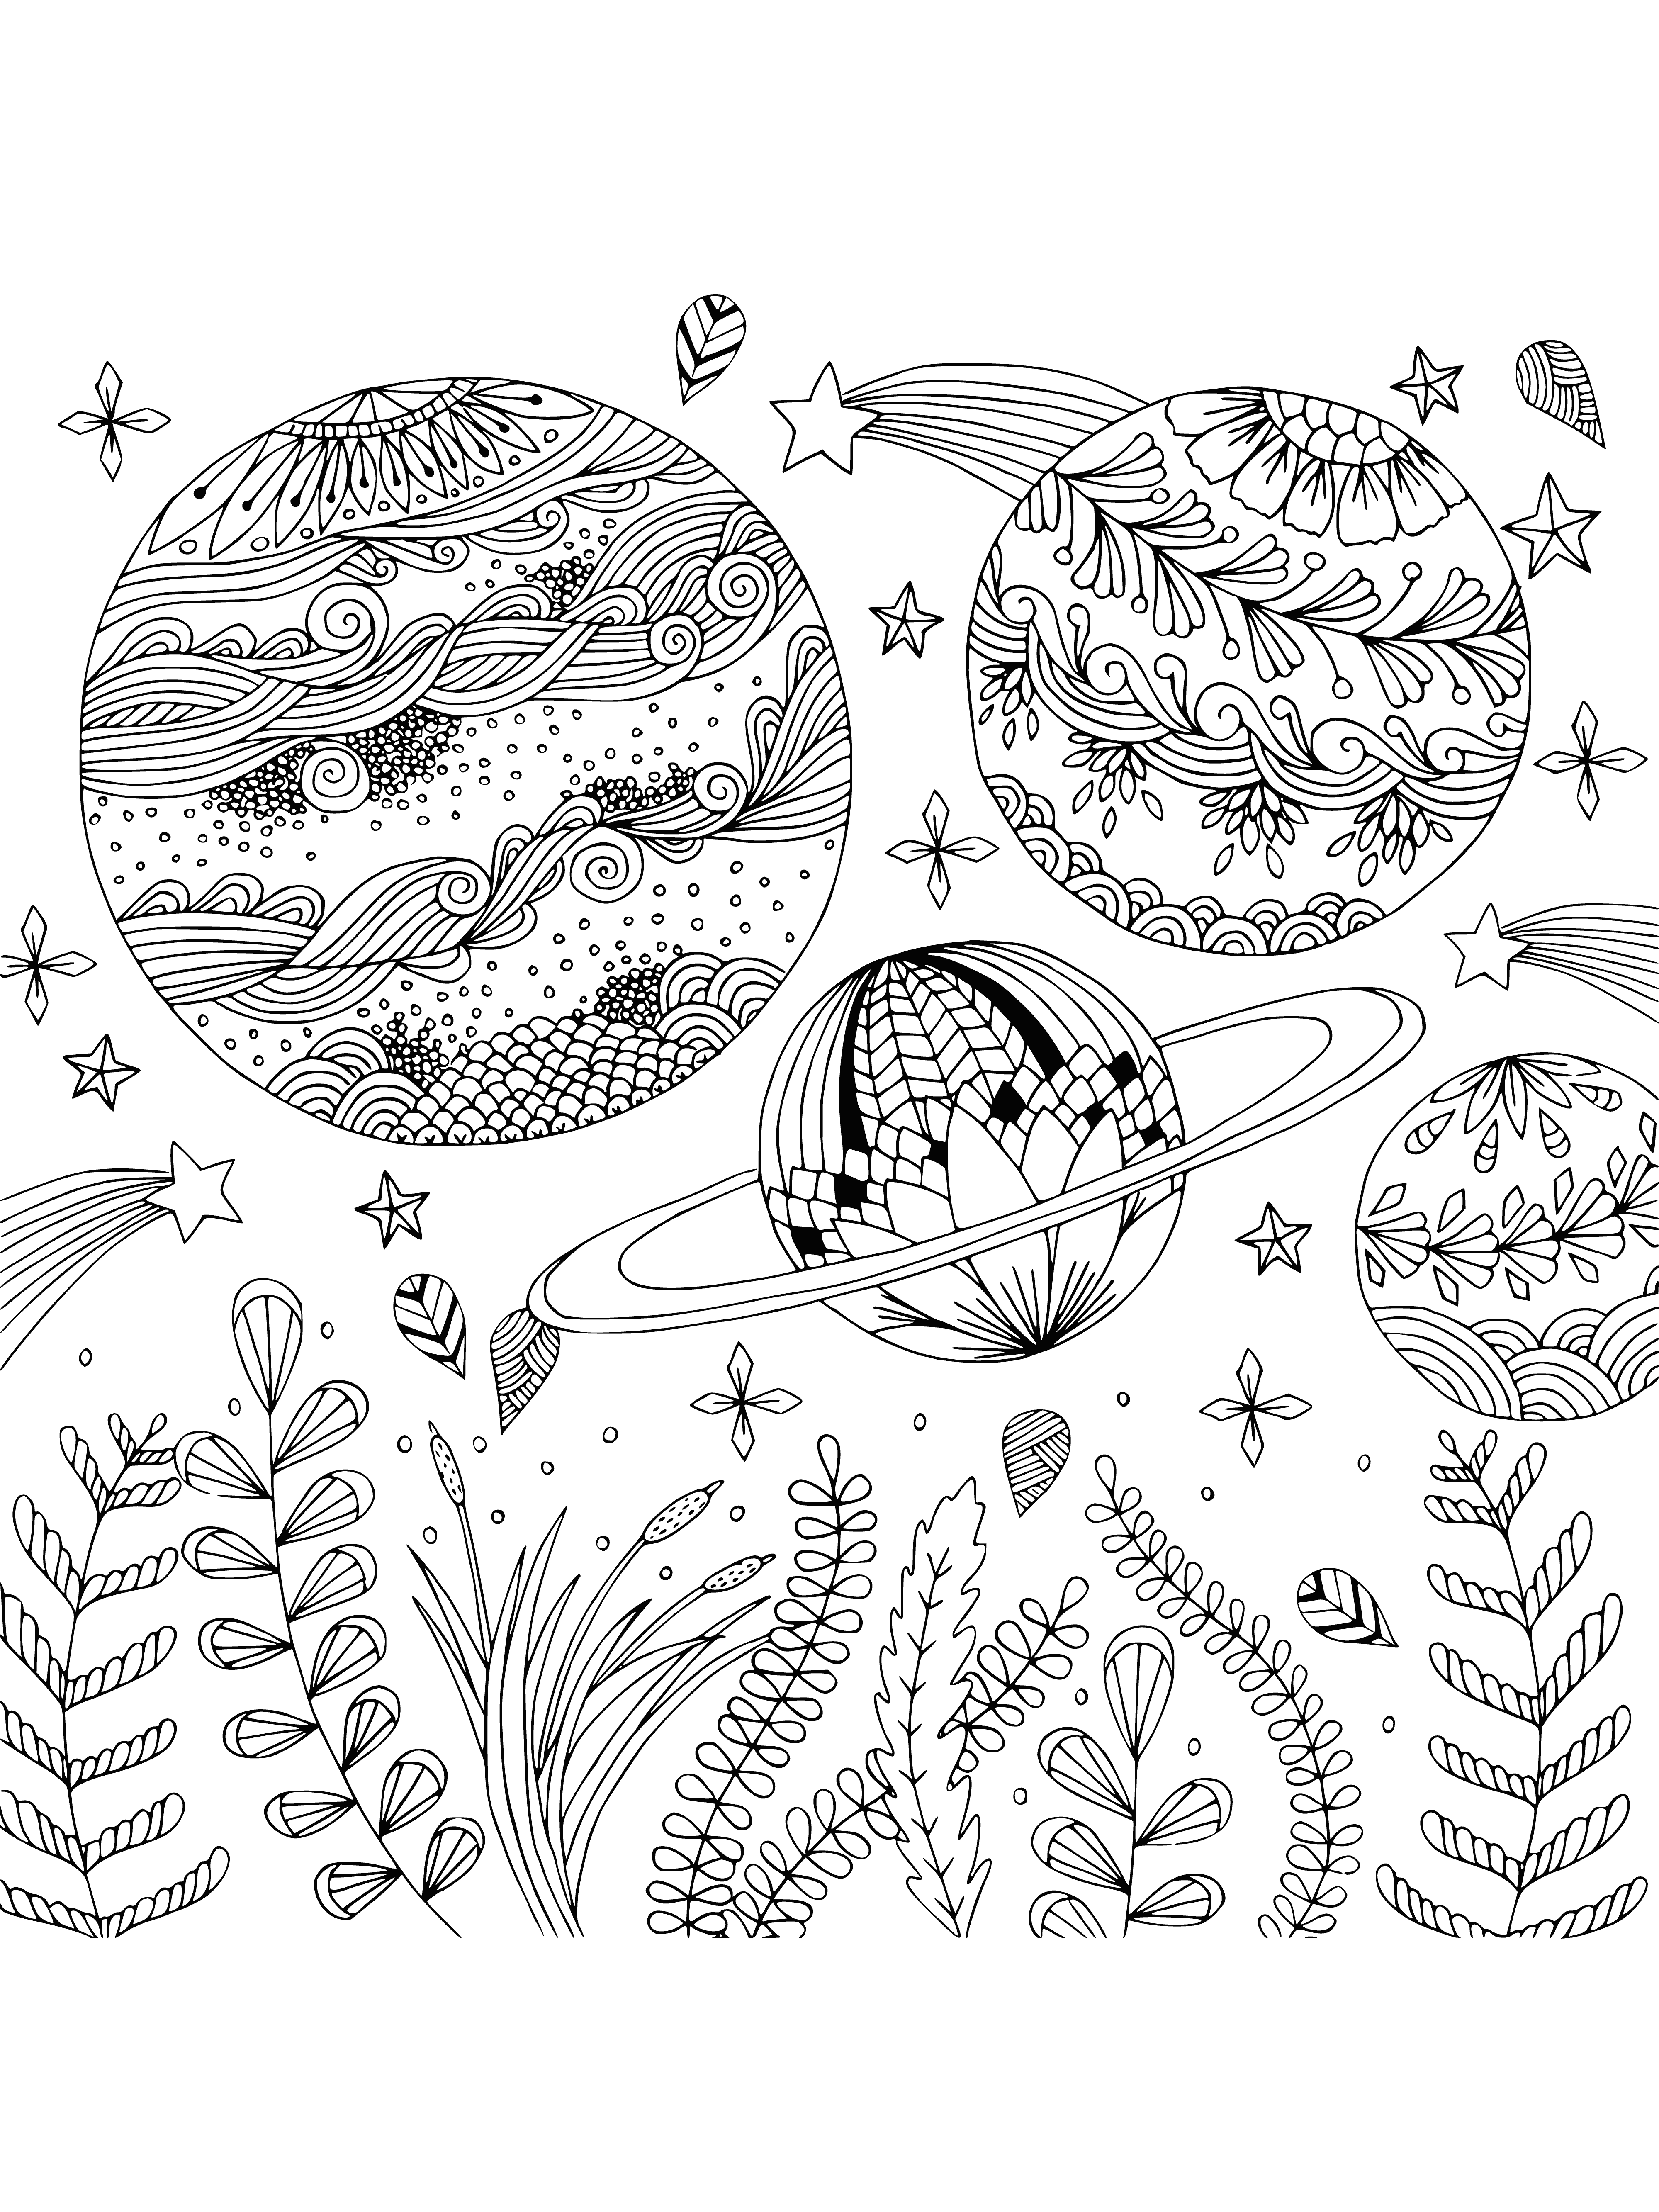 Planets coloring page